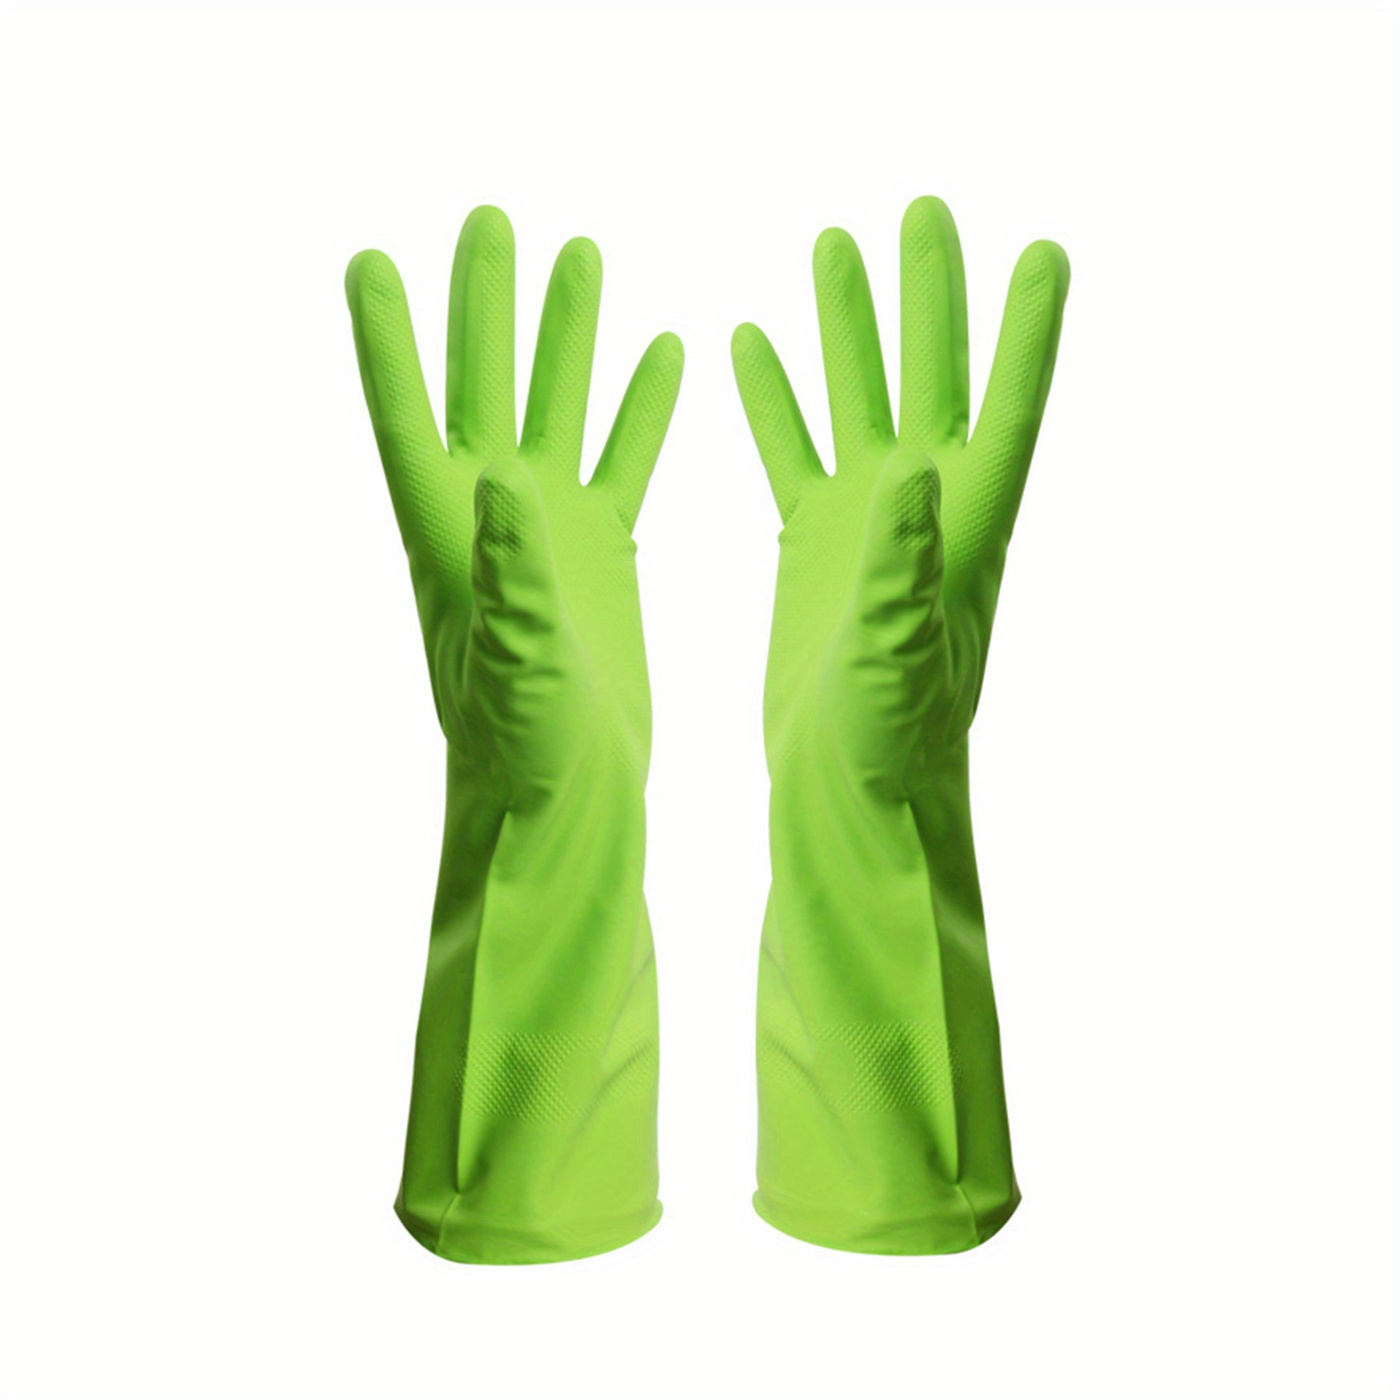 Household Cleaning Gloves Reusable Dish Washing Waterproof